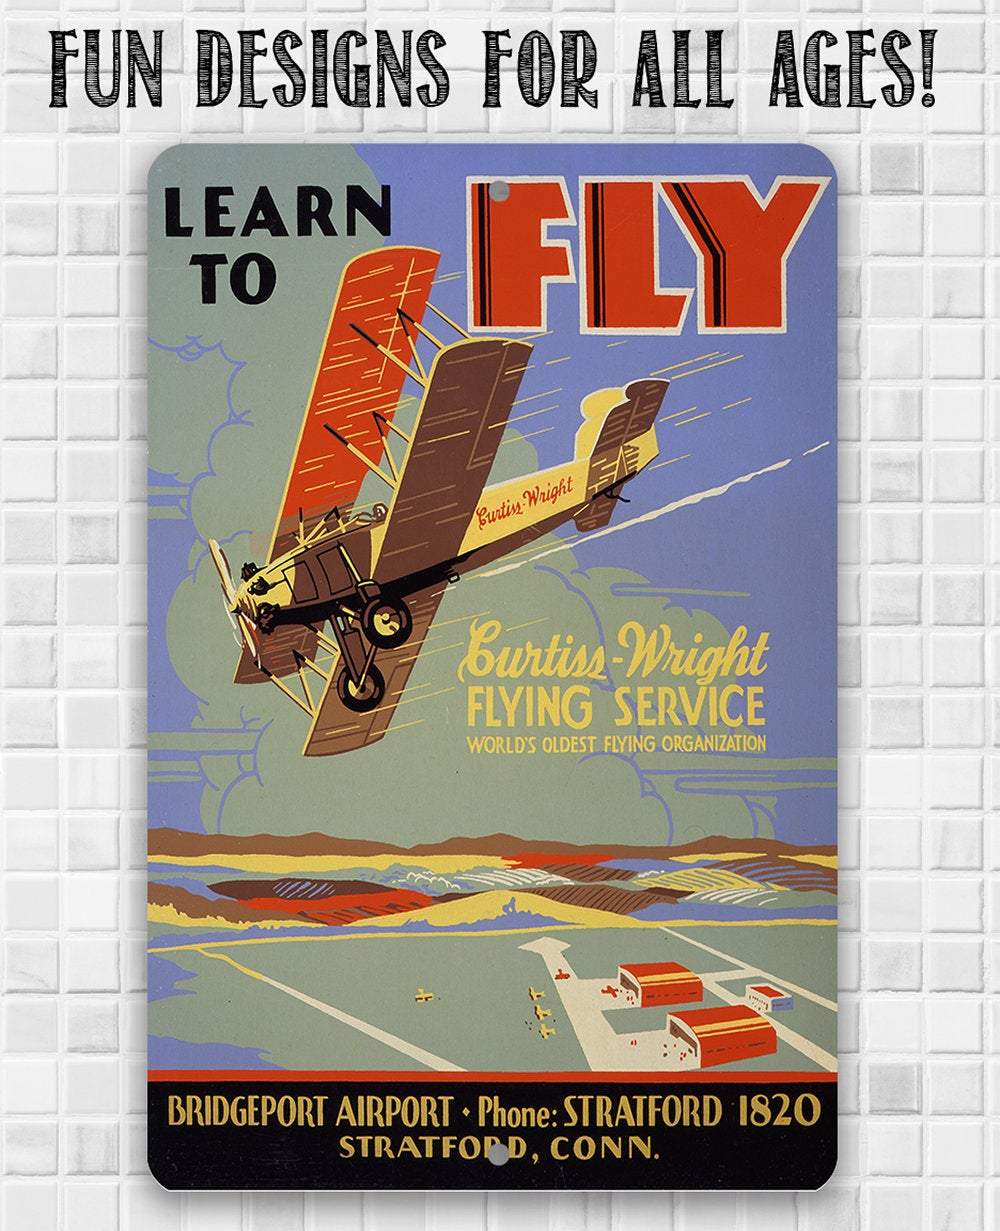 Learn to Fly - Metal Sign | Lone Star Art.